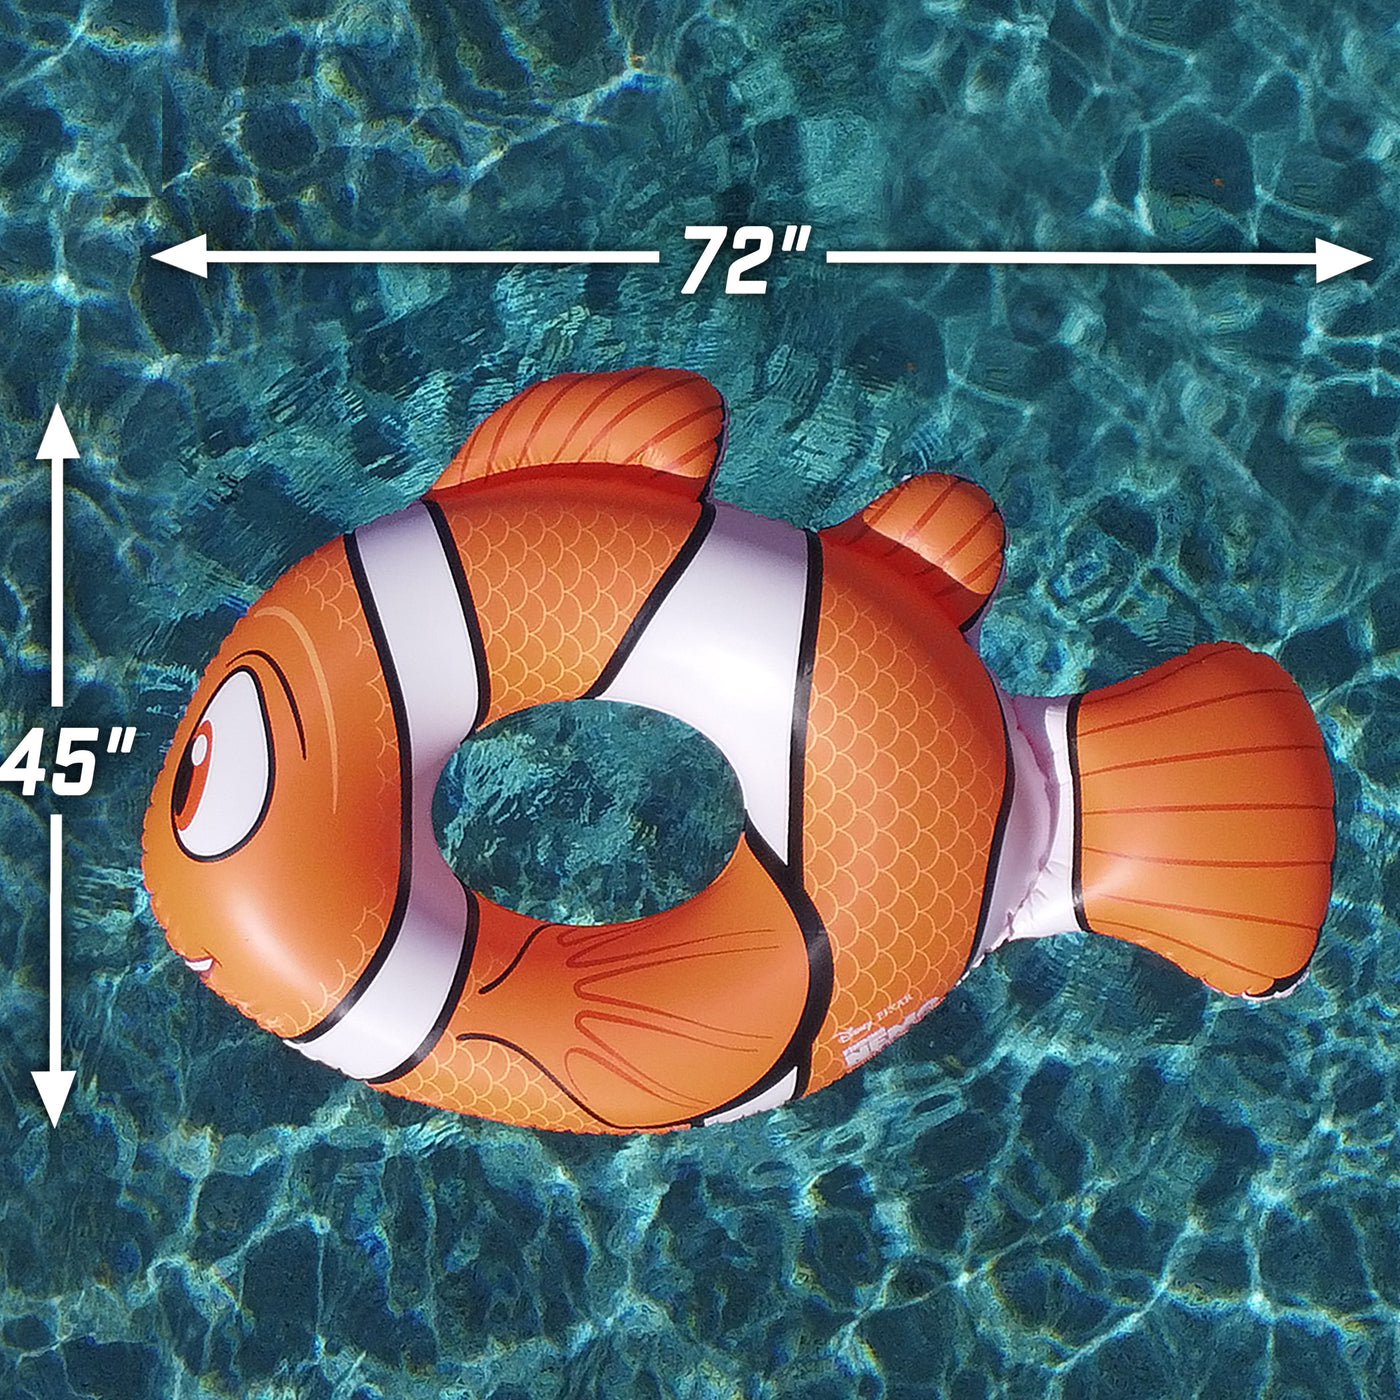 Disney Pixar Nemo Pool Float Party Tube by GoFloats - Inflatable Raft for Adults and Kids, Orange